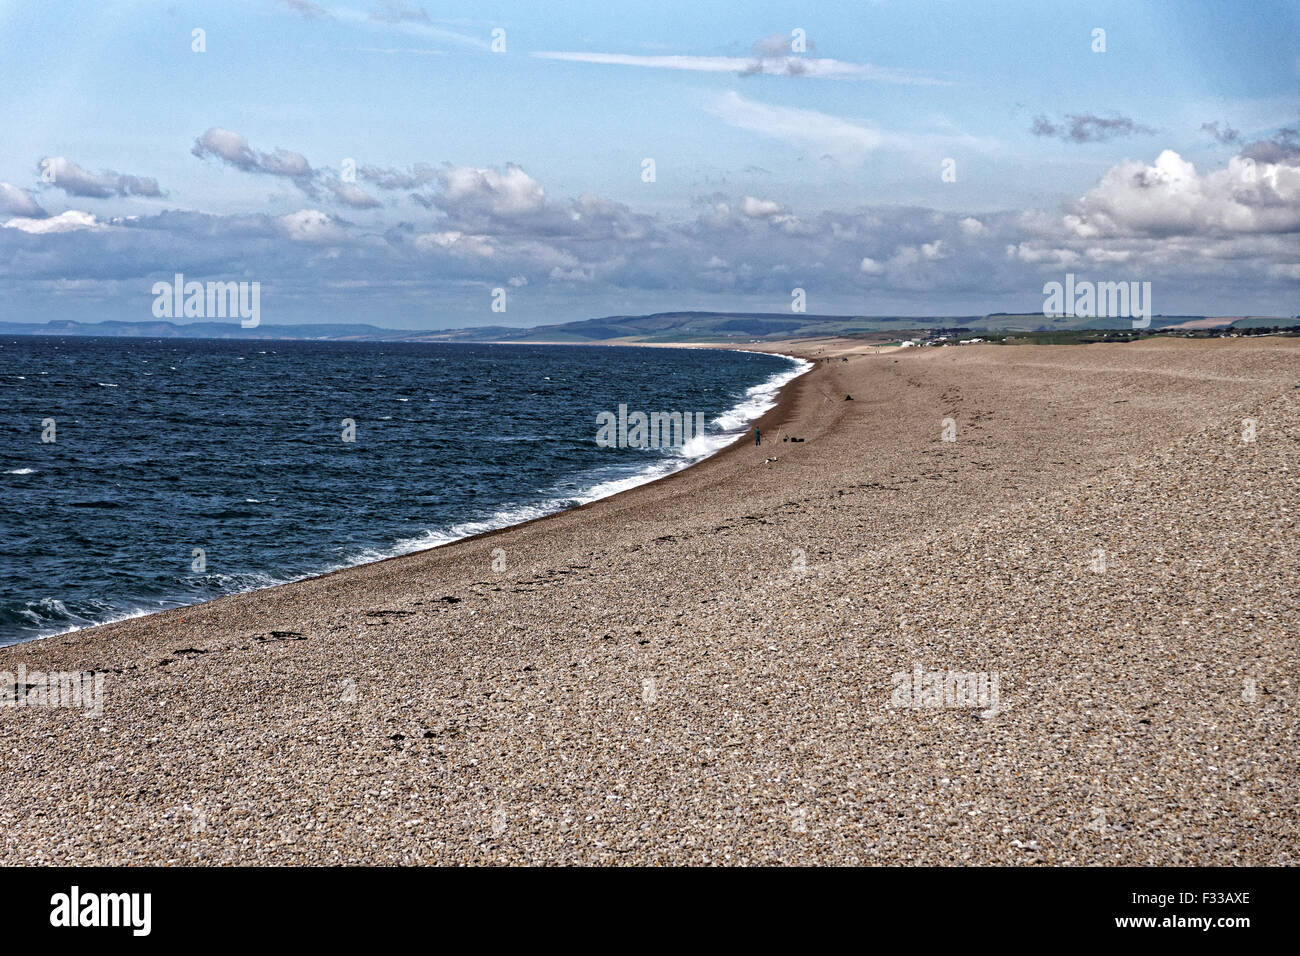 Visit-Dorset - A fantastic shot over Chesil Beach and the Fleet Nature  Reserve. 💦⁠ Chesil beach is a bank of pebbles stretching for 18 miles  along the Dorset Coast. Trapped behind this